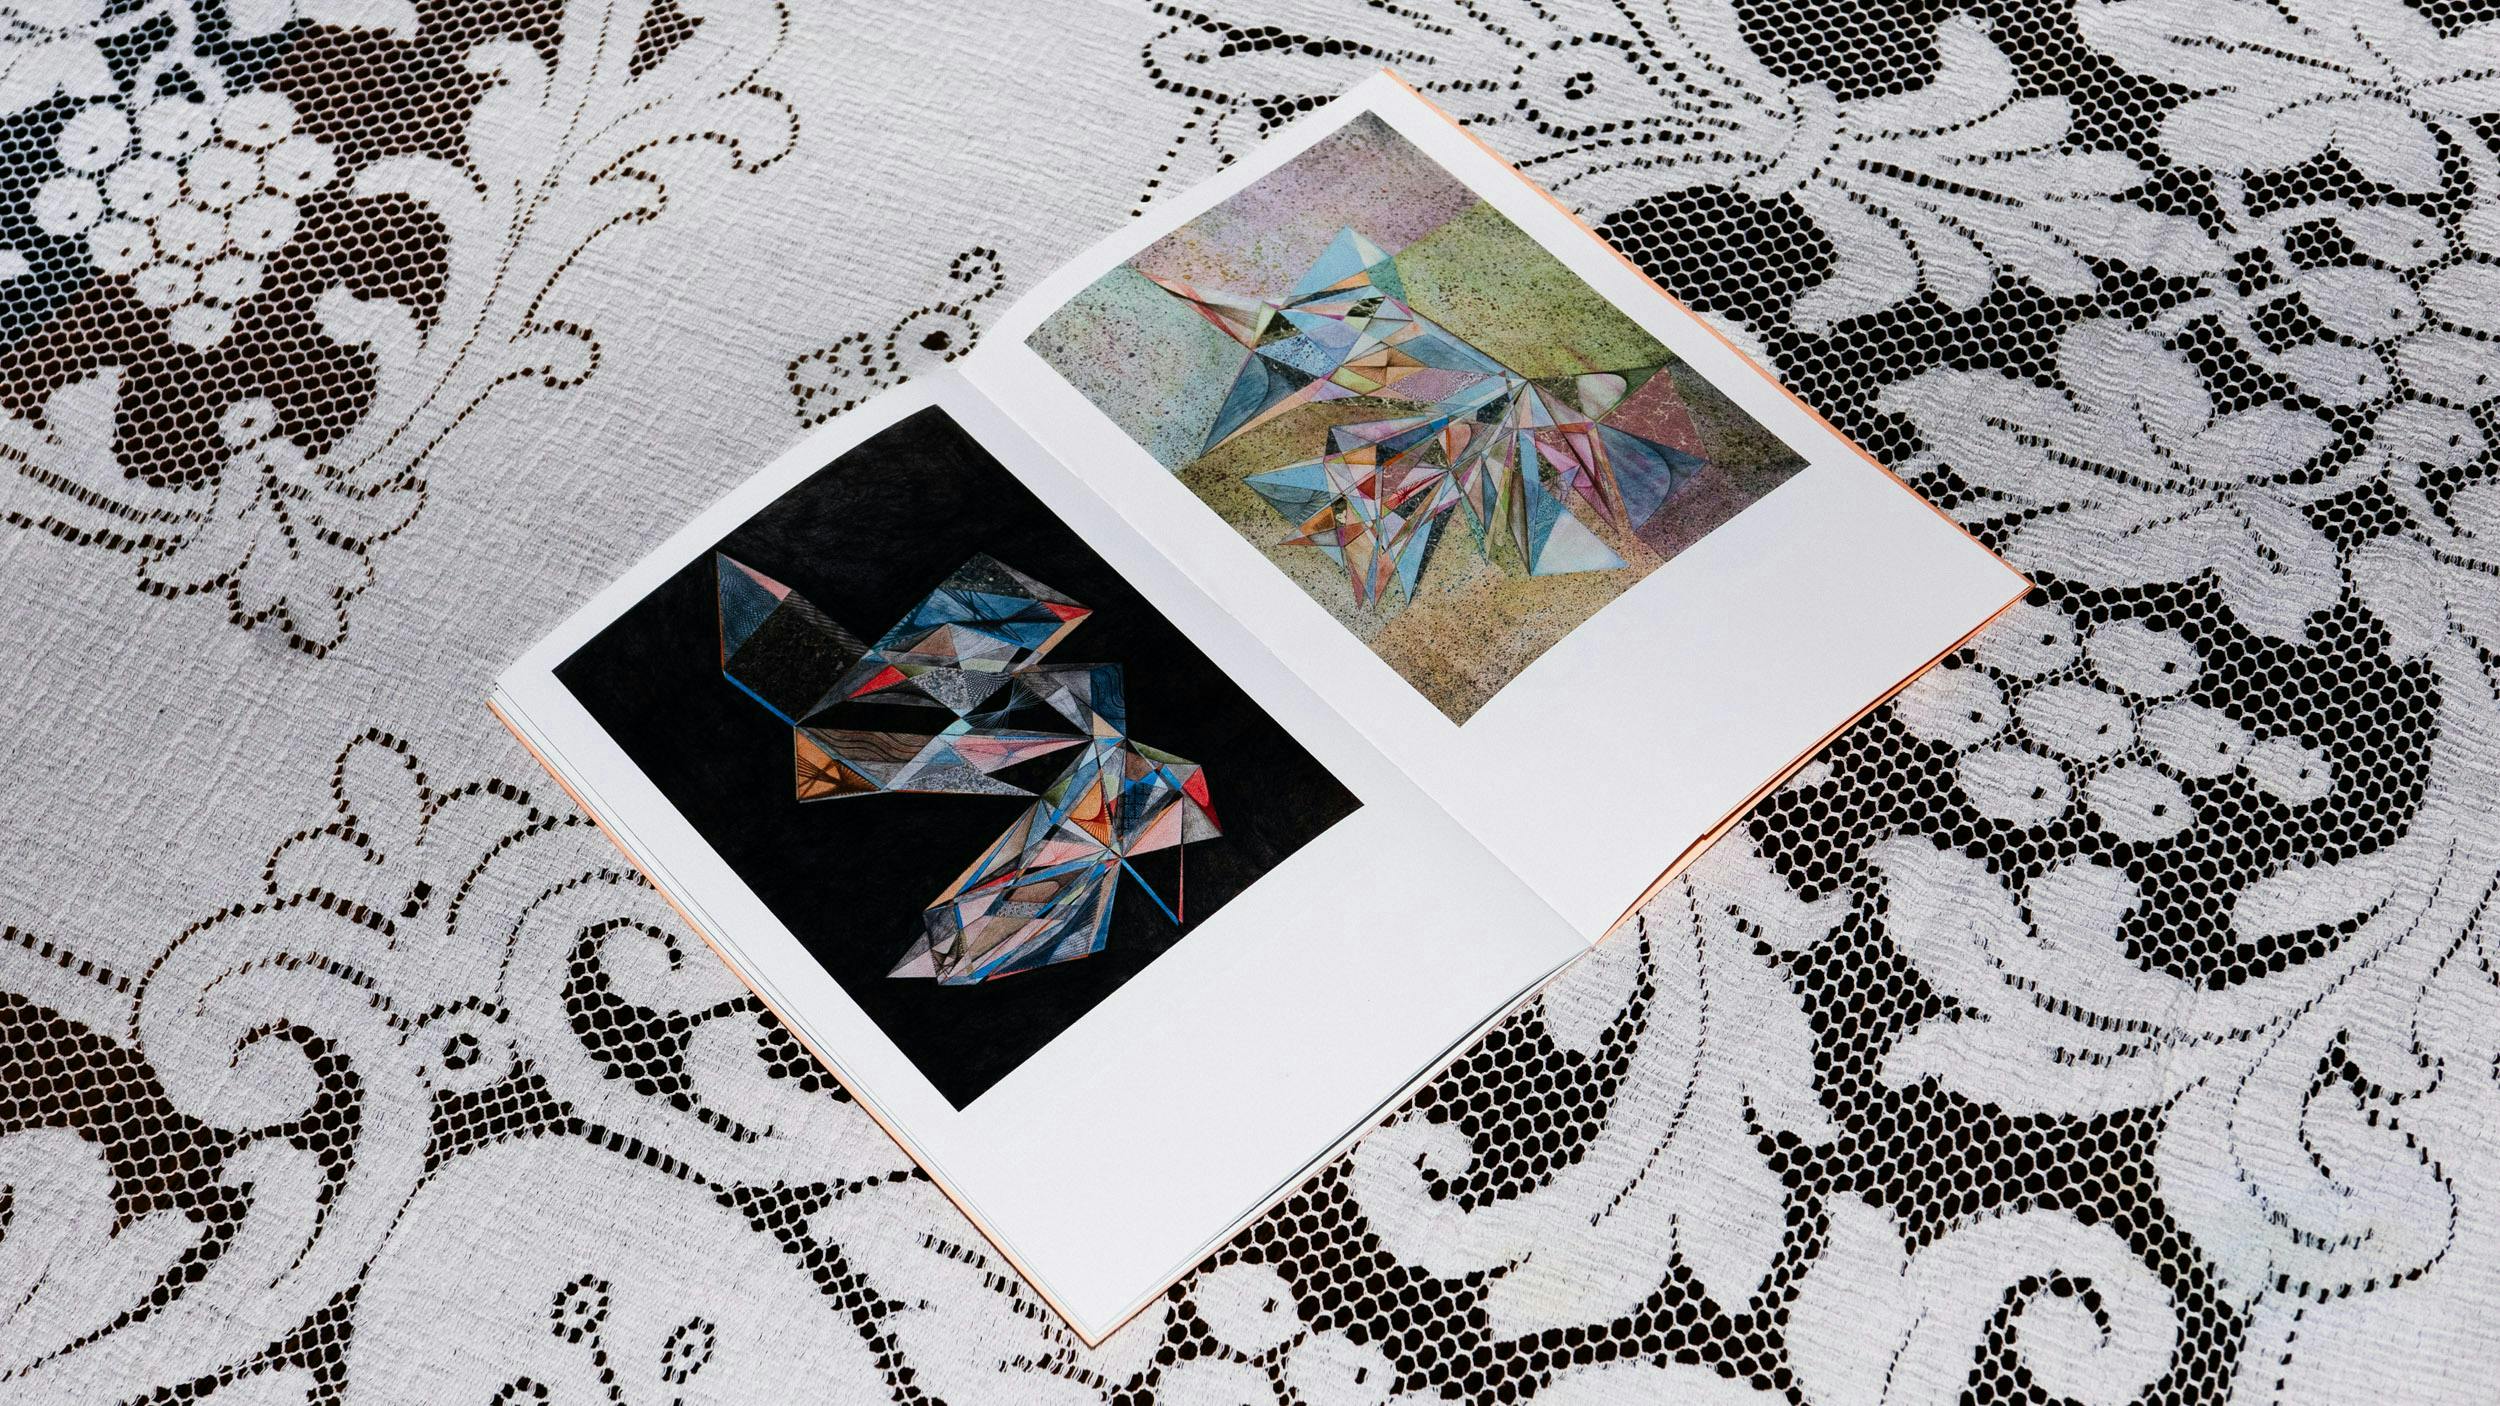 Booklet open on surface with white lace tablecloth, drawings of abstract colourful shapes